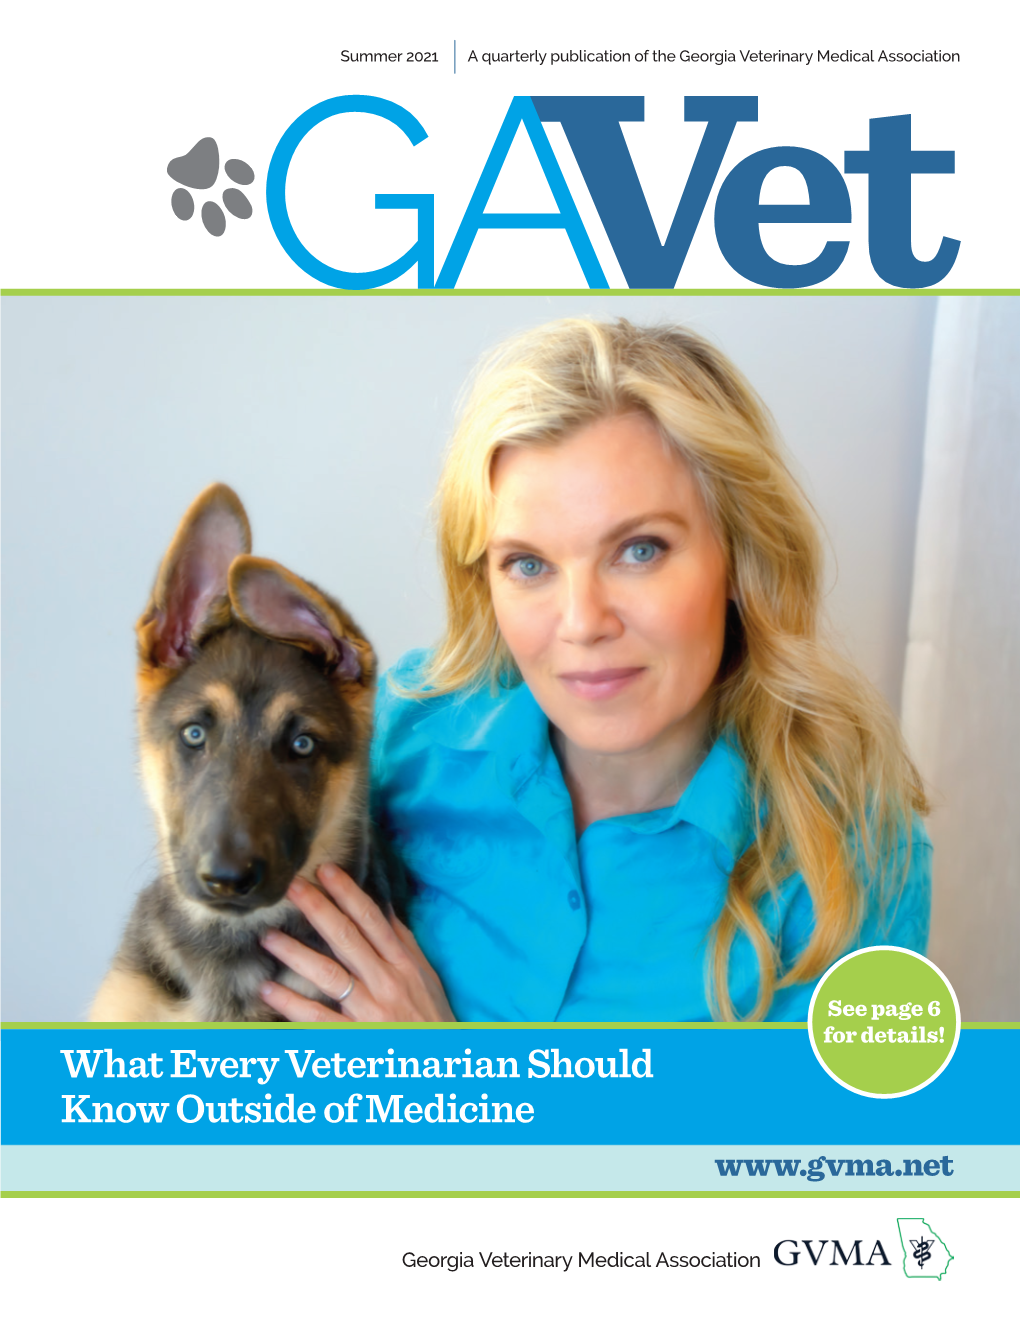 What Every Veterinarian Should Know Outside of Medicine